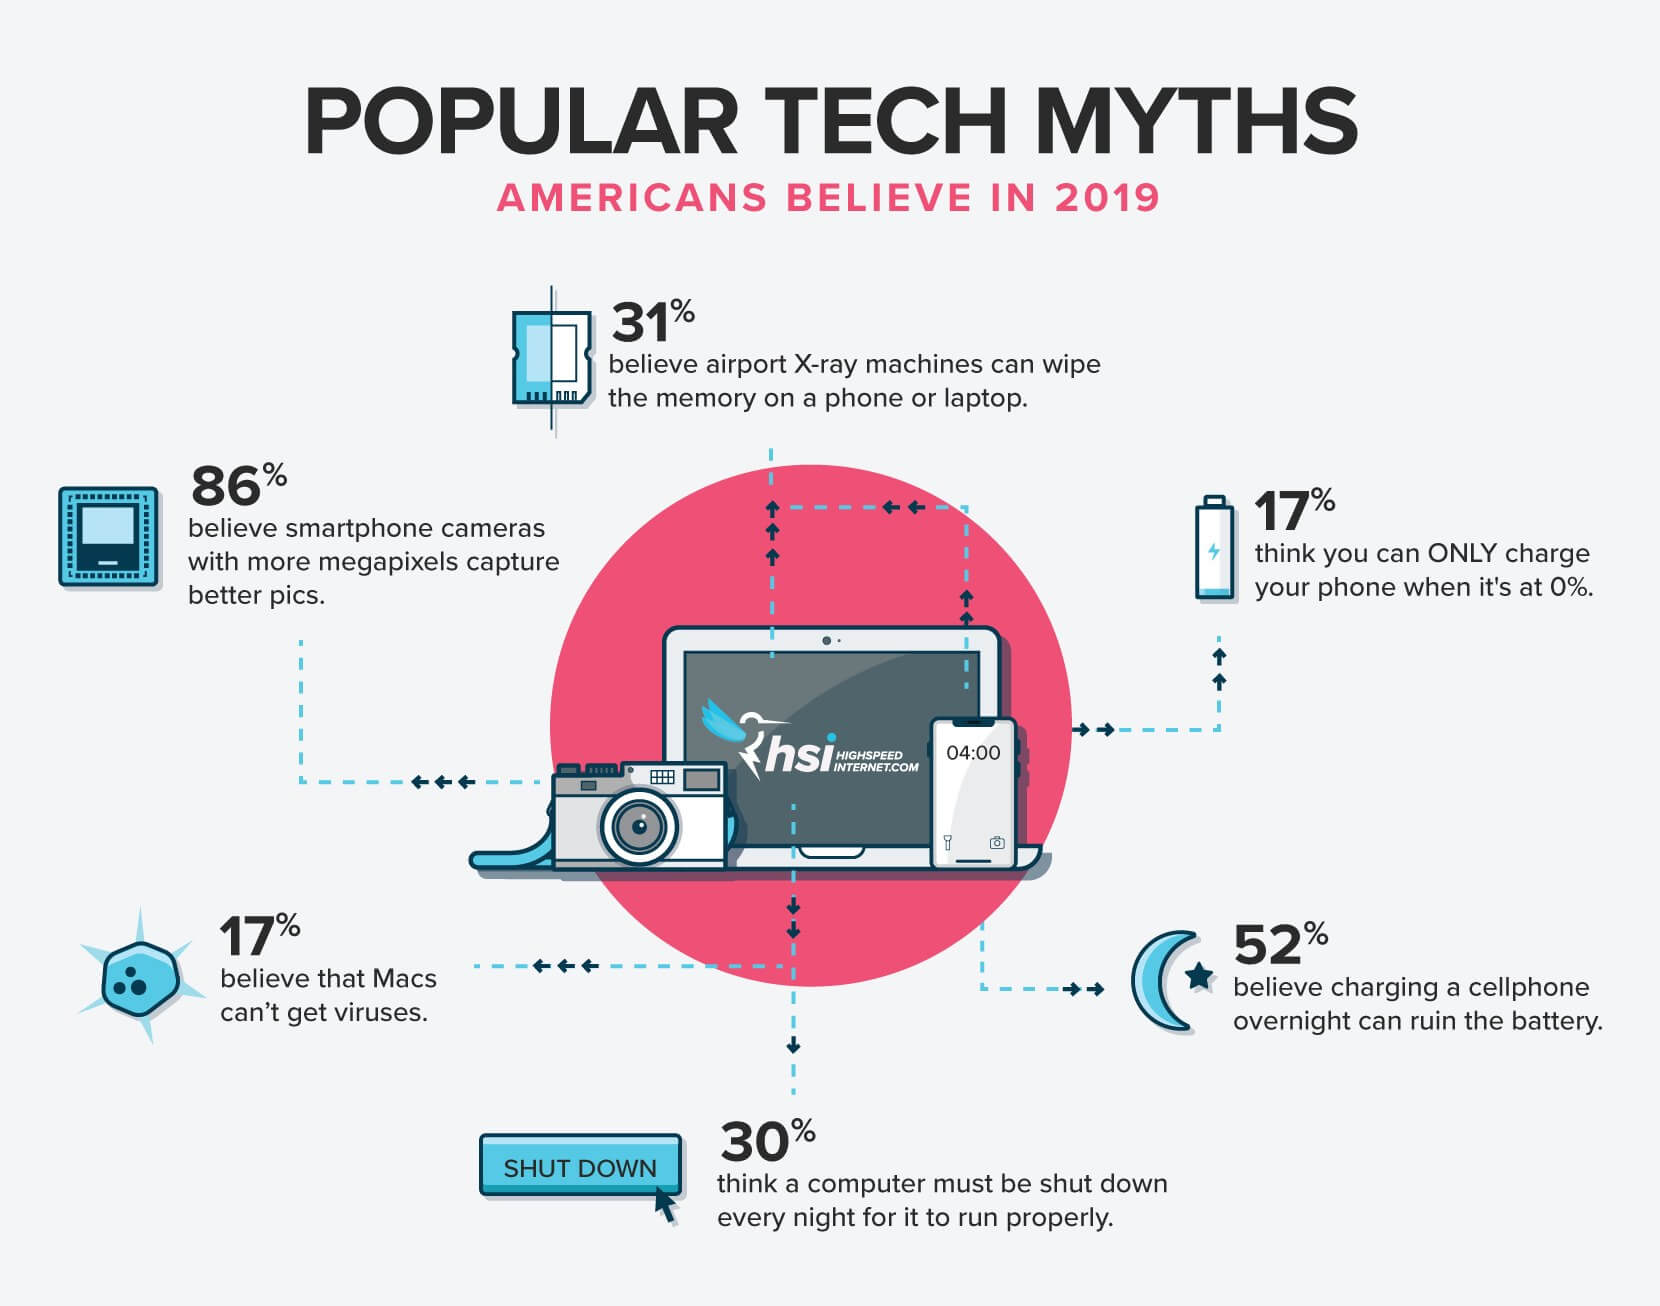 Check out some of the most popular tech myths people still believe